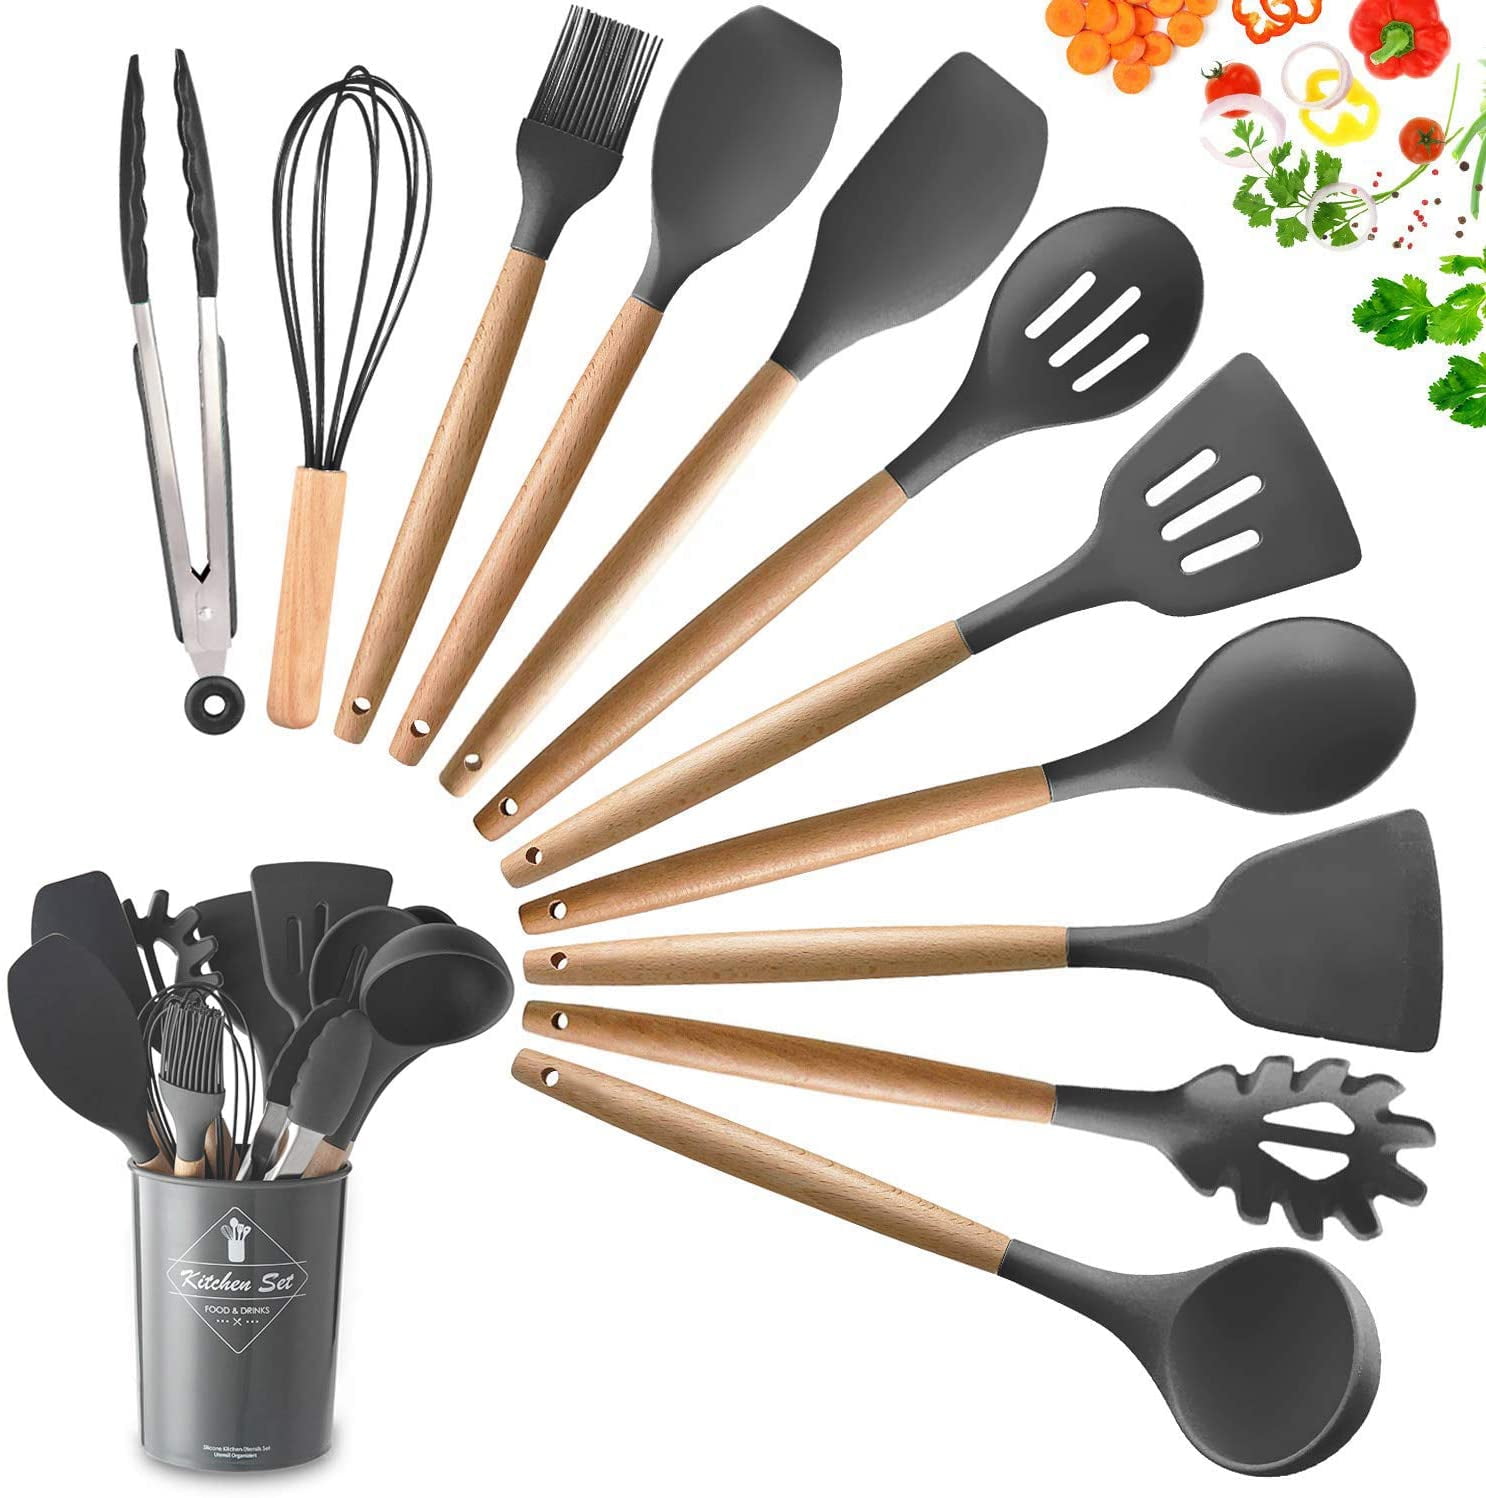 BPA Free Non-Toxic Cooking Utensils 11 Pieces Wooden Silicone